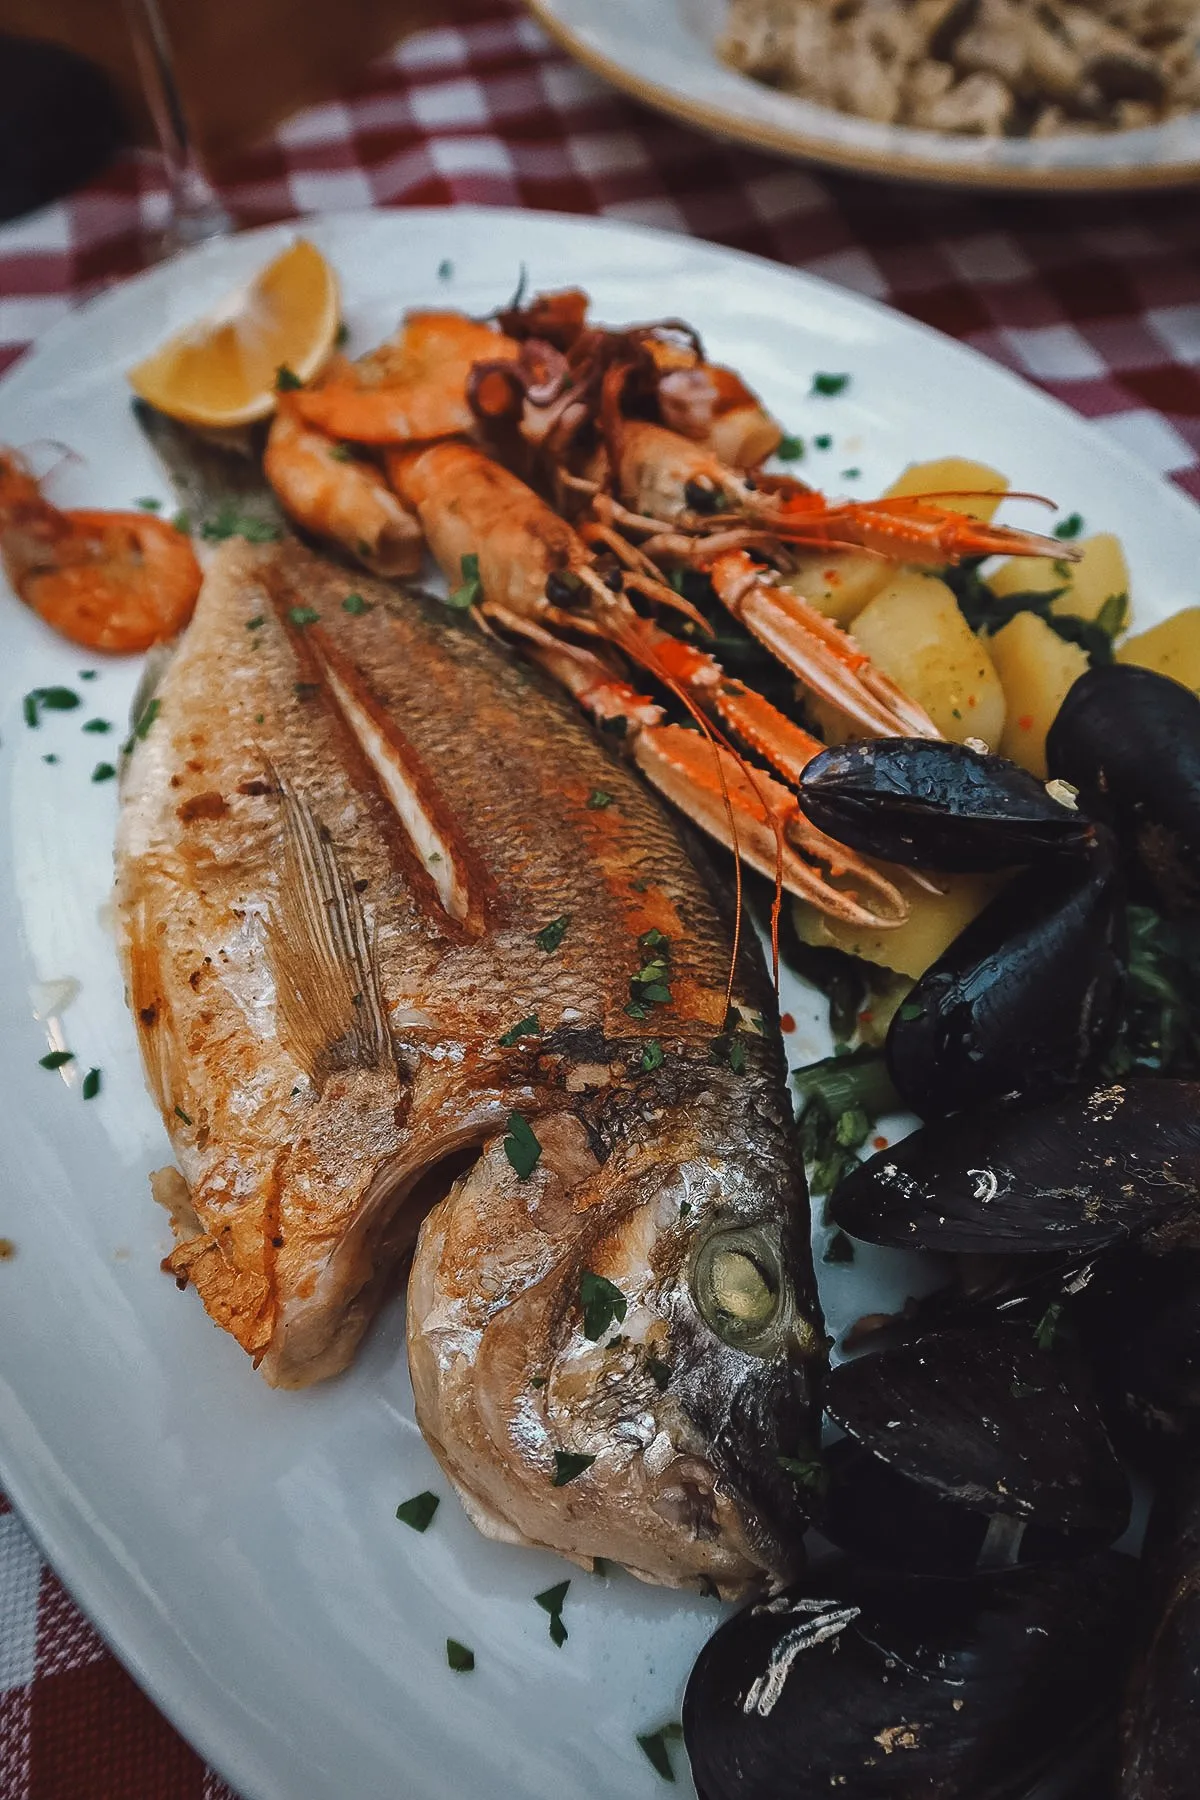 Seafood platter at a restaurant in Rovinj